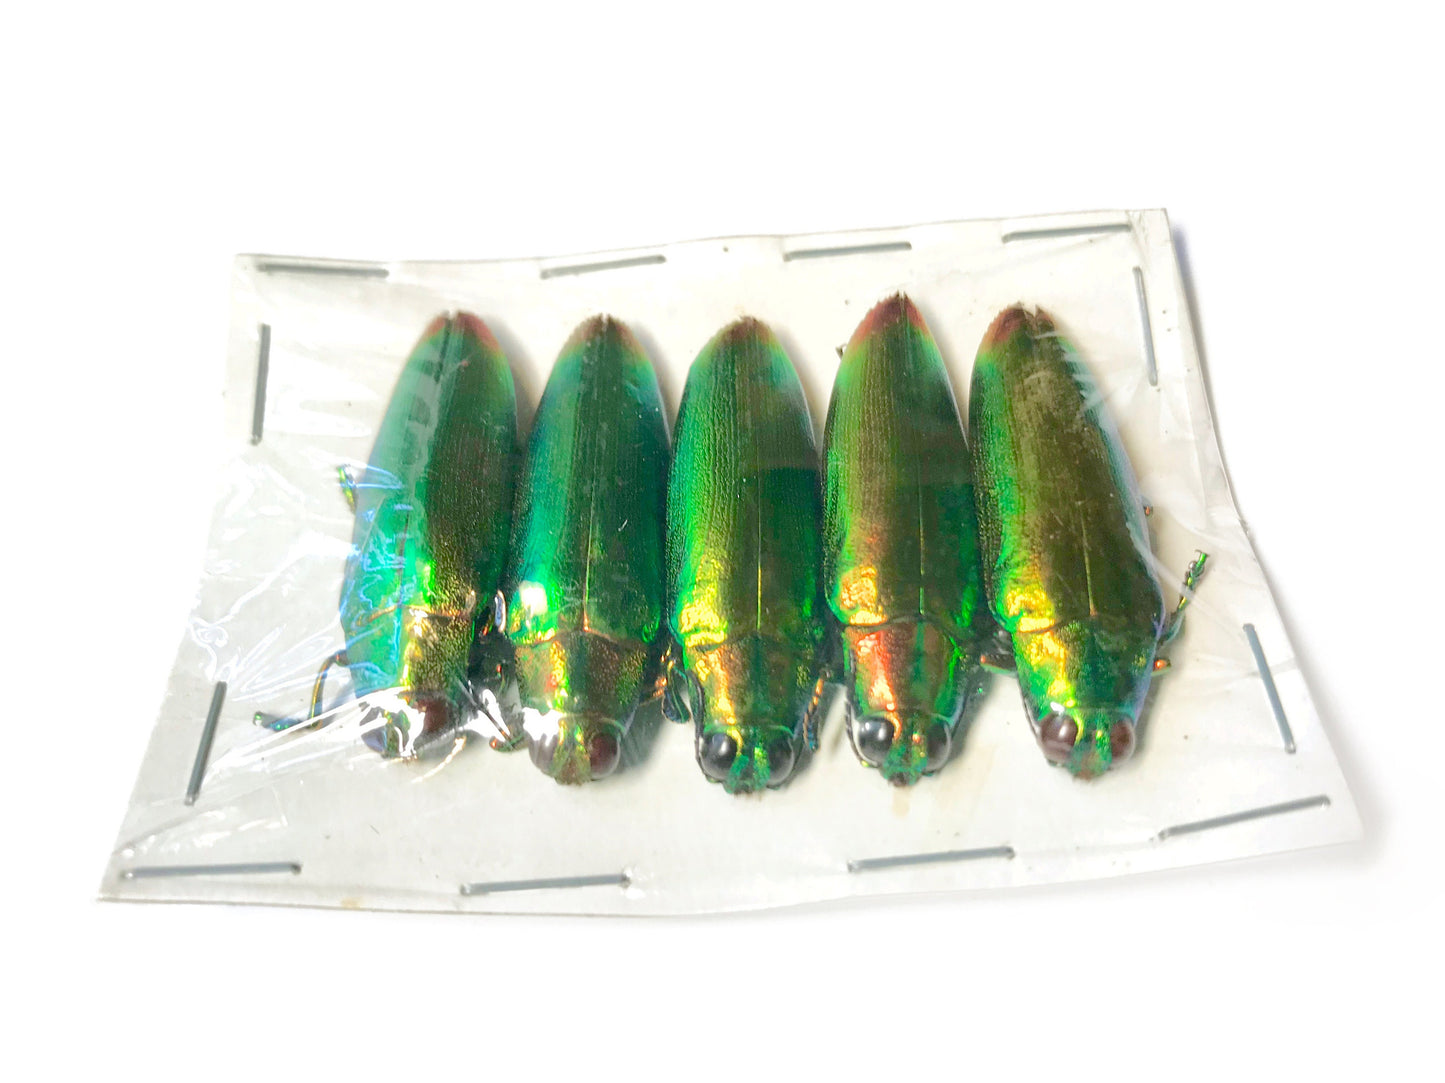 Jewel Beetle Chrysochroa fulminans fulminans Real Insect Taxidermy Iridescent Metallic Pack of 5